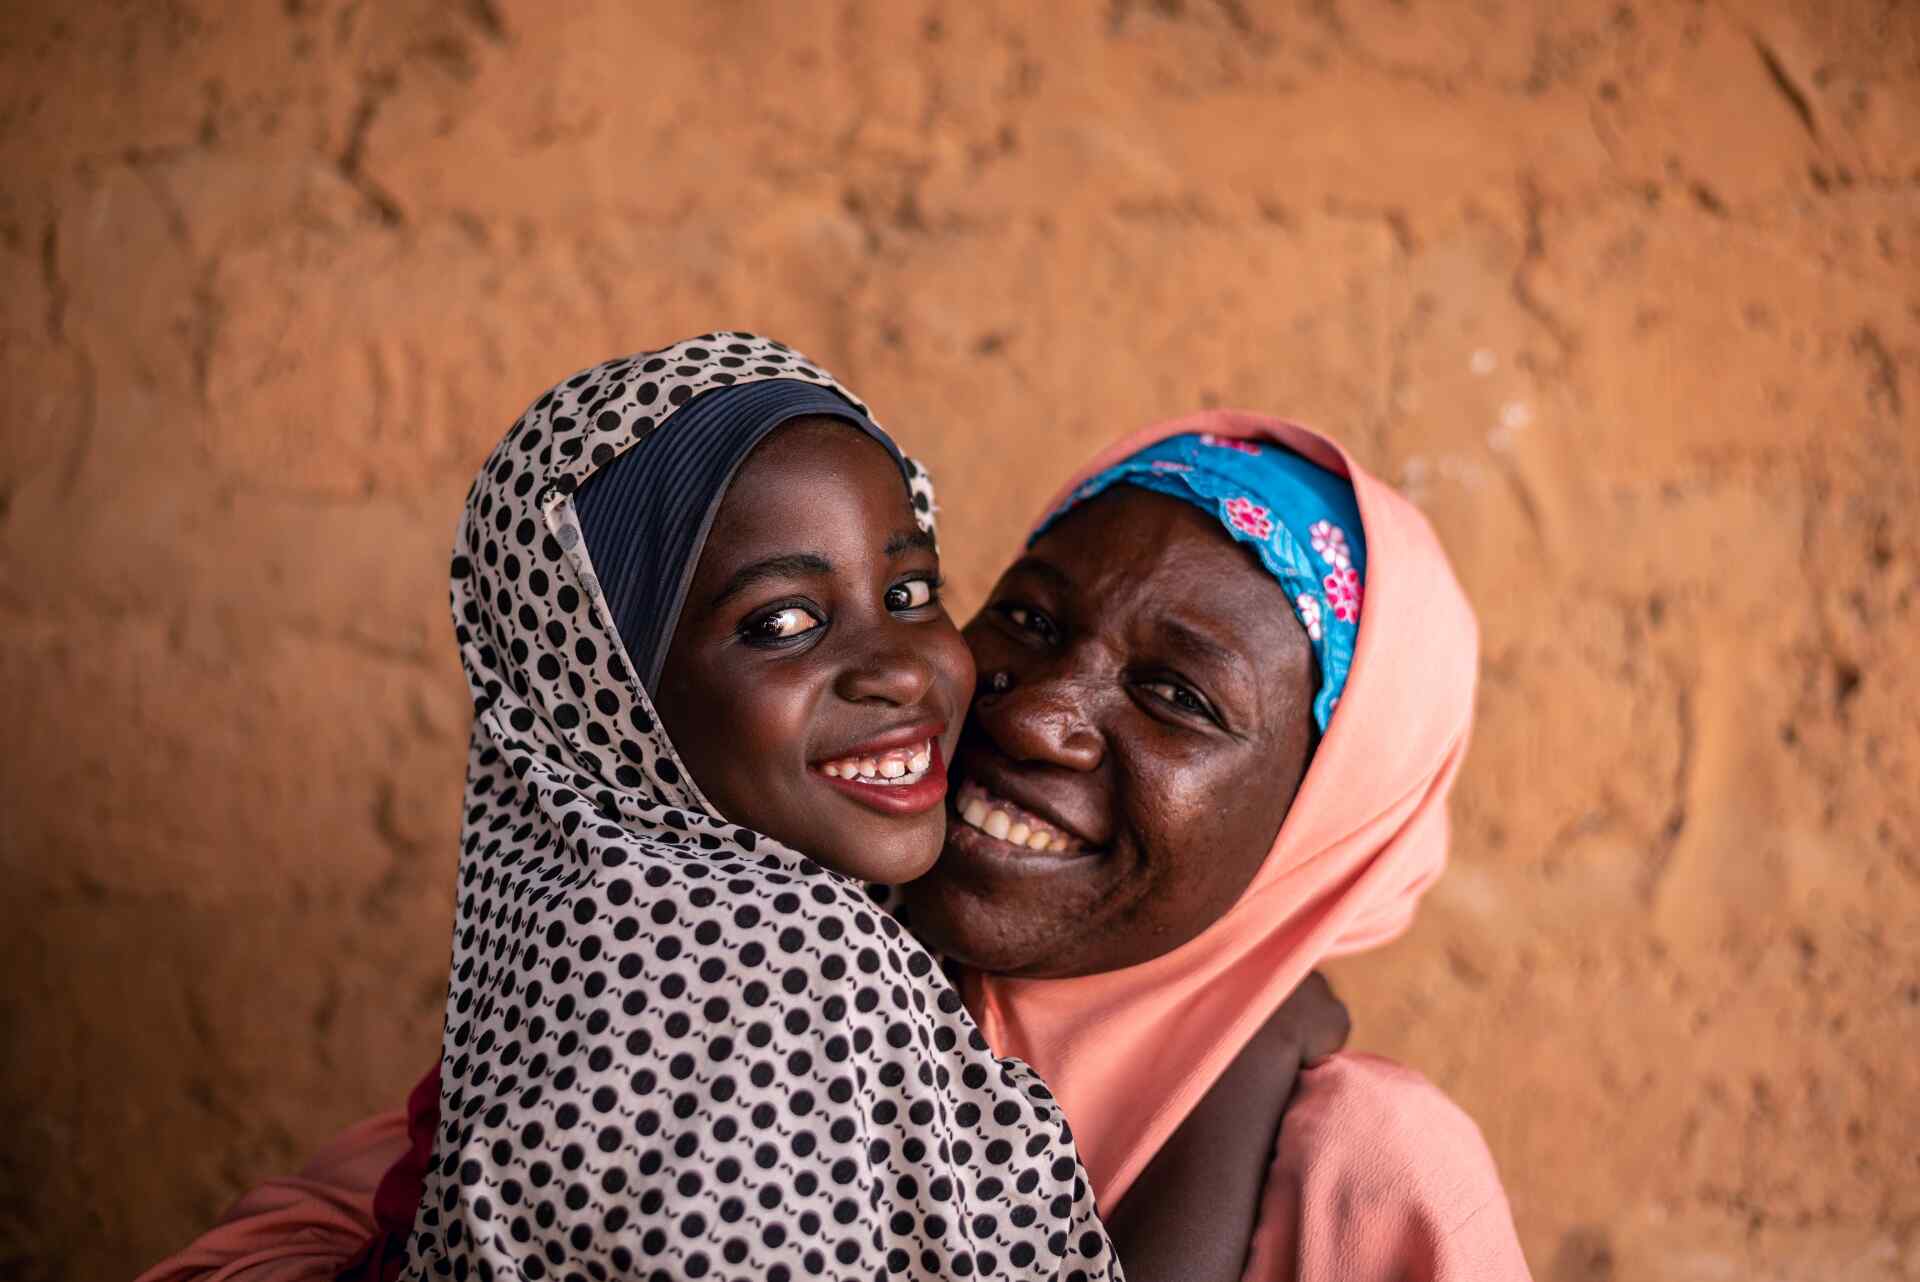 A mother and a daughter embrace and share a smile while posing for a photo.